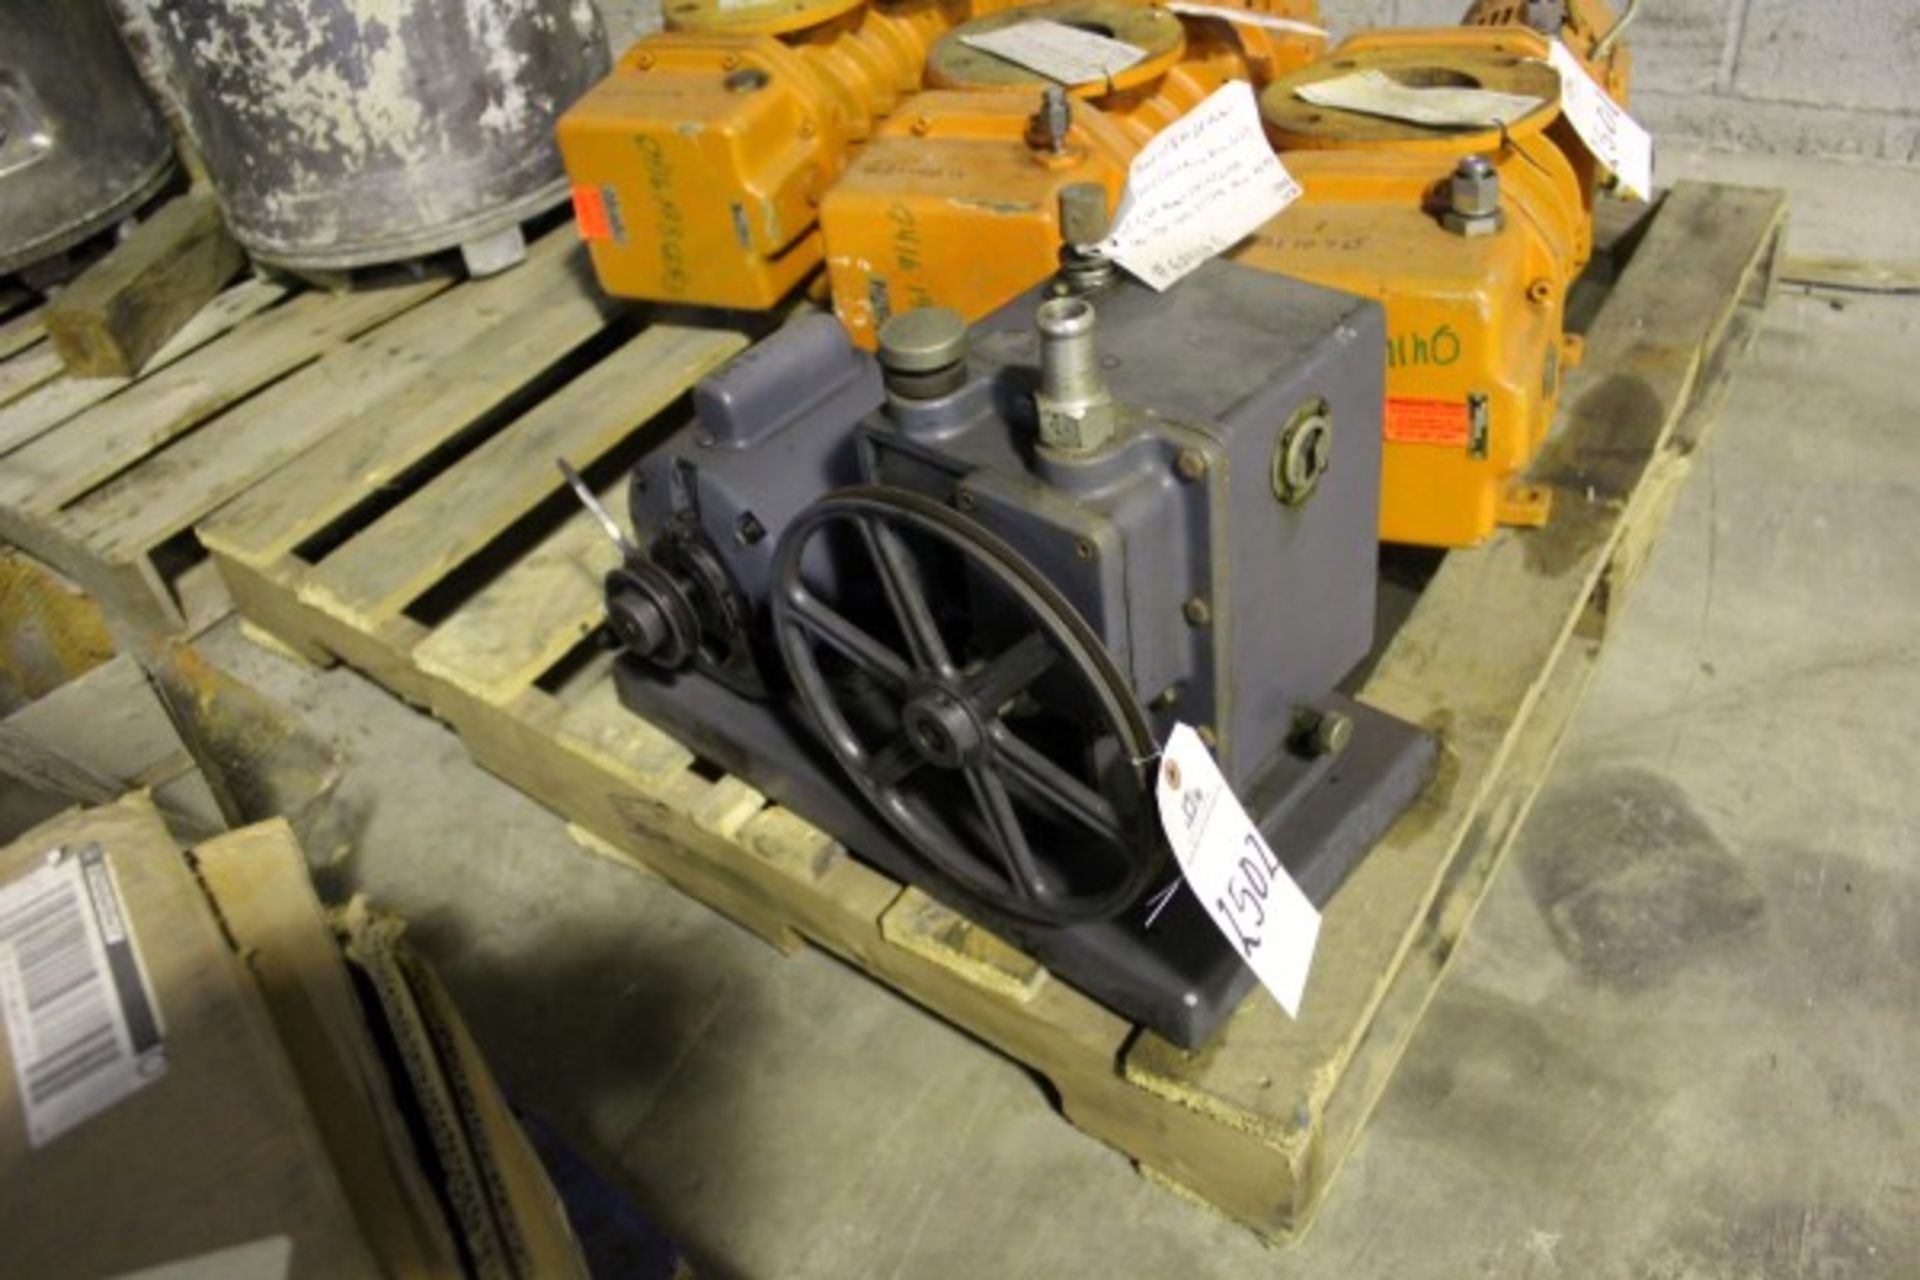 Vacuum Pump With 1/2 Hp Ge Motor M#5kC4J614A | Seller to load for $10 per lot or buyers may remove